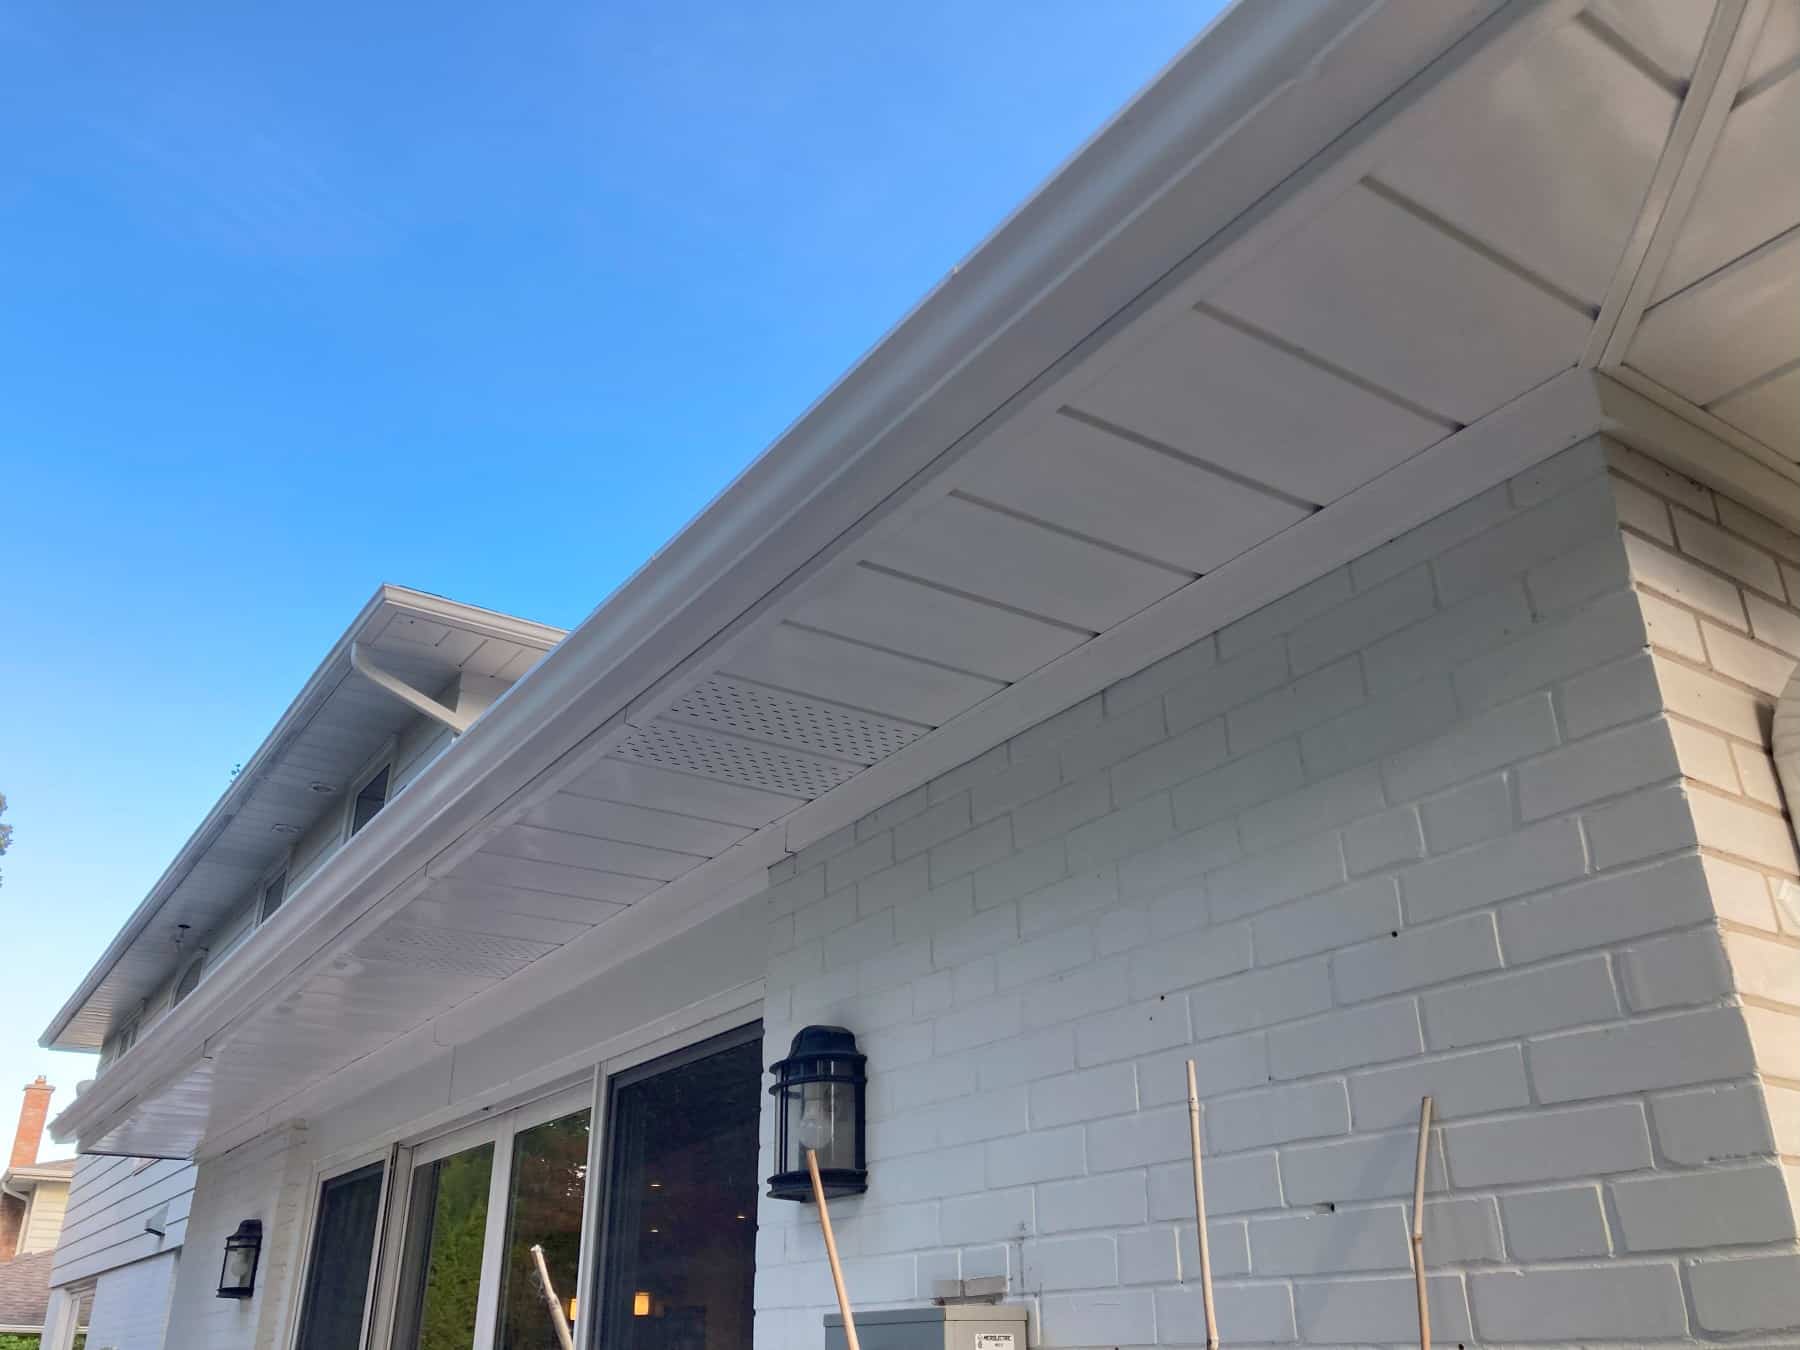 freshly painting and shining soffits, eaves, and fascia on a house